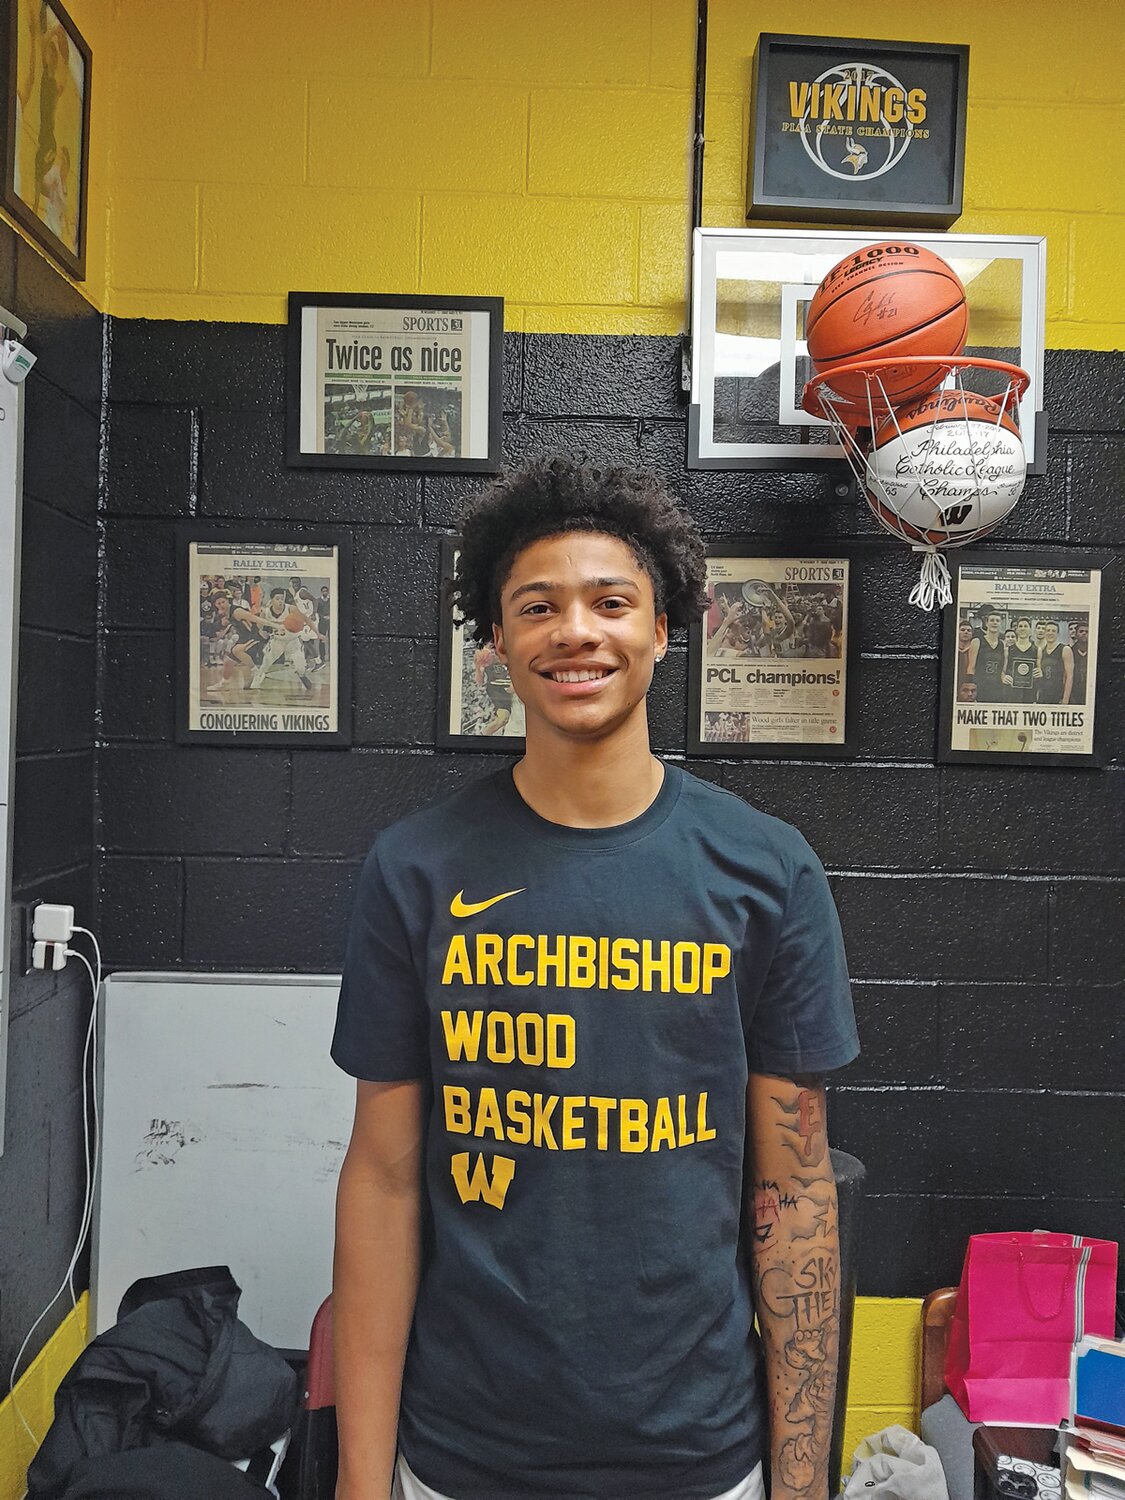 Archbishop Wood’s Jalil Bethea, ranked as one of the top 10 prospects in the Class of 2024 by both ESPN and Rivals.com, signed his letter of intent with the Miami Hurricanes earlier this month.